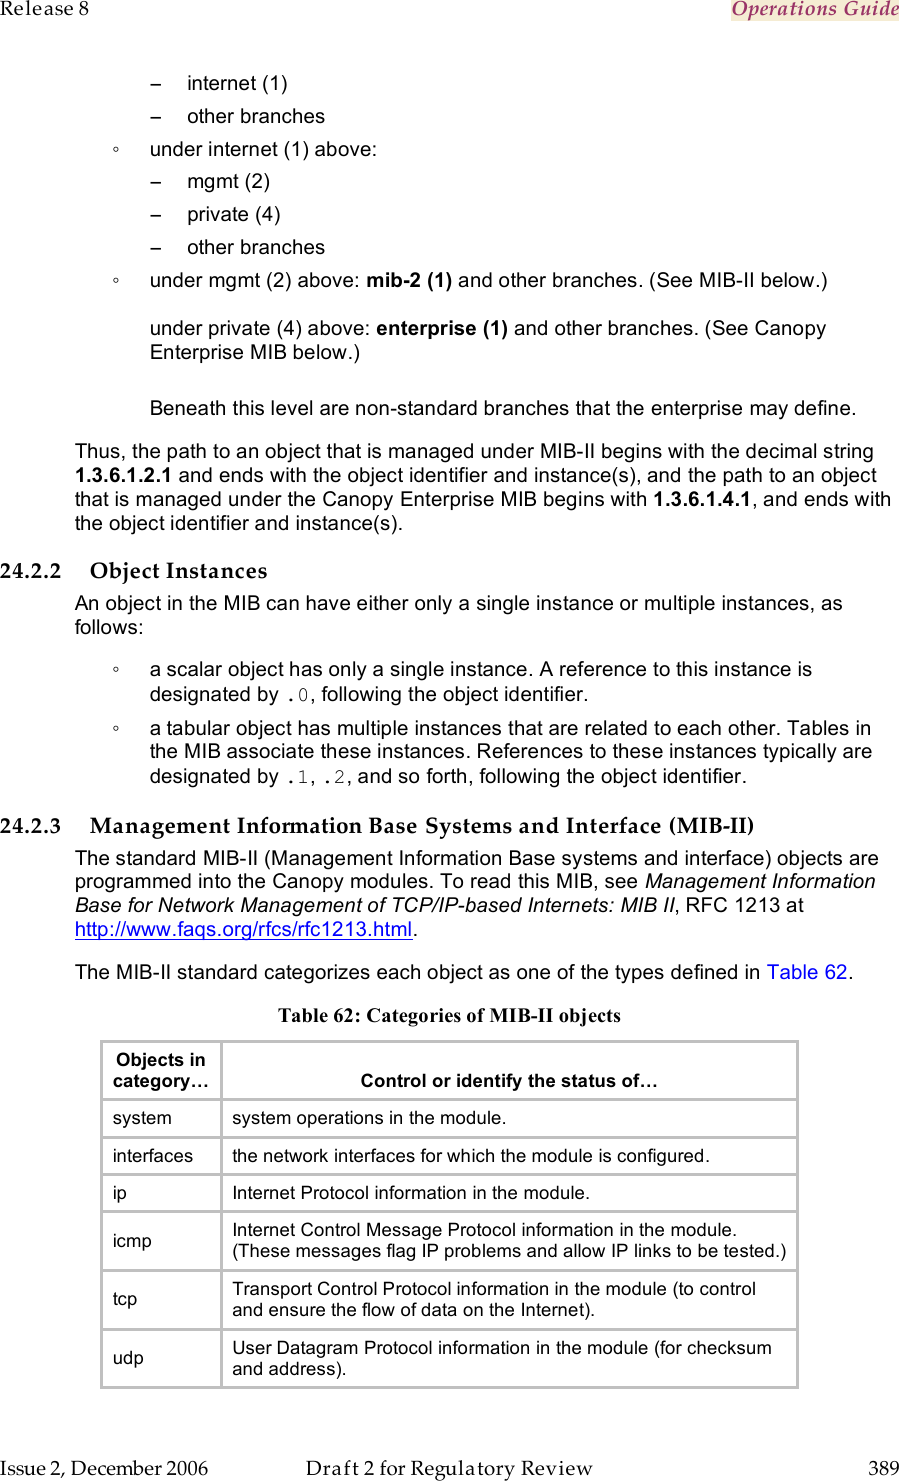 Release 8    Operations Guide   Issue 2, December 2006  Draft 2 for Regulatory Review  389     −  internet (1) −  other branches ◦  under internet (1) above: −  mgmt (2) −  private (4) −  other branches ◦  under mgmt (2) above: mib-2 (1) and other branches. (See MIB-II below.)  under private (4) above: enterprise (1) and other branches. (See Canopy Enterprise MIB below.)  Beneath this level are non-standard branches that the enterprise may define. Thus, the path to an object that is managed under MIB-II begins with the decimal string 1.3.6.1.2.1 and ends with the object identifier and instance(s), and the path to an object that is managed under the Canopy Enterprise MIB begins with 1.3.6.1.4.1, and ends with the object identifier and instance(s). 24.2.2 Object Instances An object in the MIB can have either only a single instance or multiple instances, as follows: ◦  a scalar object has only a single instance. A reference to this instance is designated by .0, following the object identifier. ◦  a tabular object has multiple instances that are related to each other. Tables in the MIB associate these instances. References to these instances typically are designated by .1, .2, and so forth, following the object identifier. 24.2.3 Management Information Base Systems and Interface (MIB-II) The standard MIB-II (Management Information Base systems and interface) objects are programmed into the Canopy modules. To read this MIB, see Management Information Base for Network Management of TCP/IP-based Internets: MIB II, RFC 1213 at http://www.faqs.org/rfcs/rfc1213.html. The MIB-II standard categorizes each object as one of the types defined in Table 62. Table 62: Categories of MIB-II objects Objects in category…  Control or identify the status of… system system operations in the module. interfaces the network interfaces for which the module is configured. ip Internet Protocol information in the module. icmp Internet Control Message Protocol information in the module. (These messages flag IP problems and allow IP links to be tested.) tcp Transport Control Protocol information in the module (to control and ensure the flow of data on the Internet). udp User Datagram Protocol information in the module (for checksum and address). 